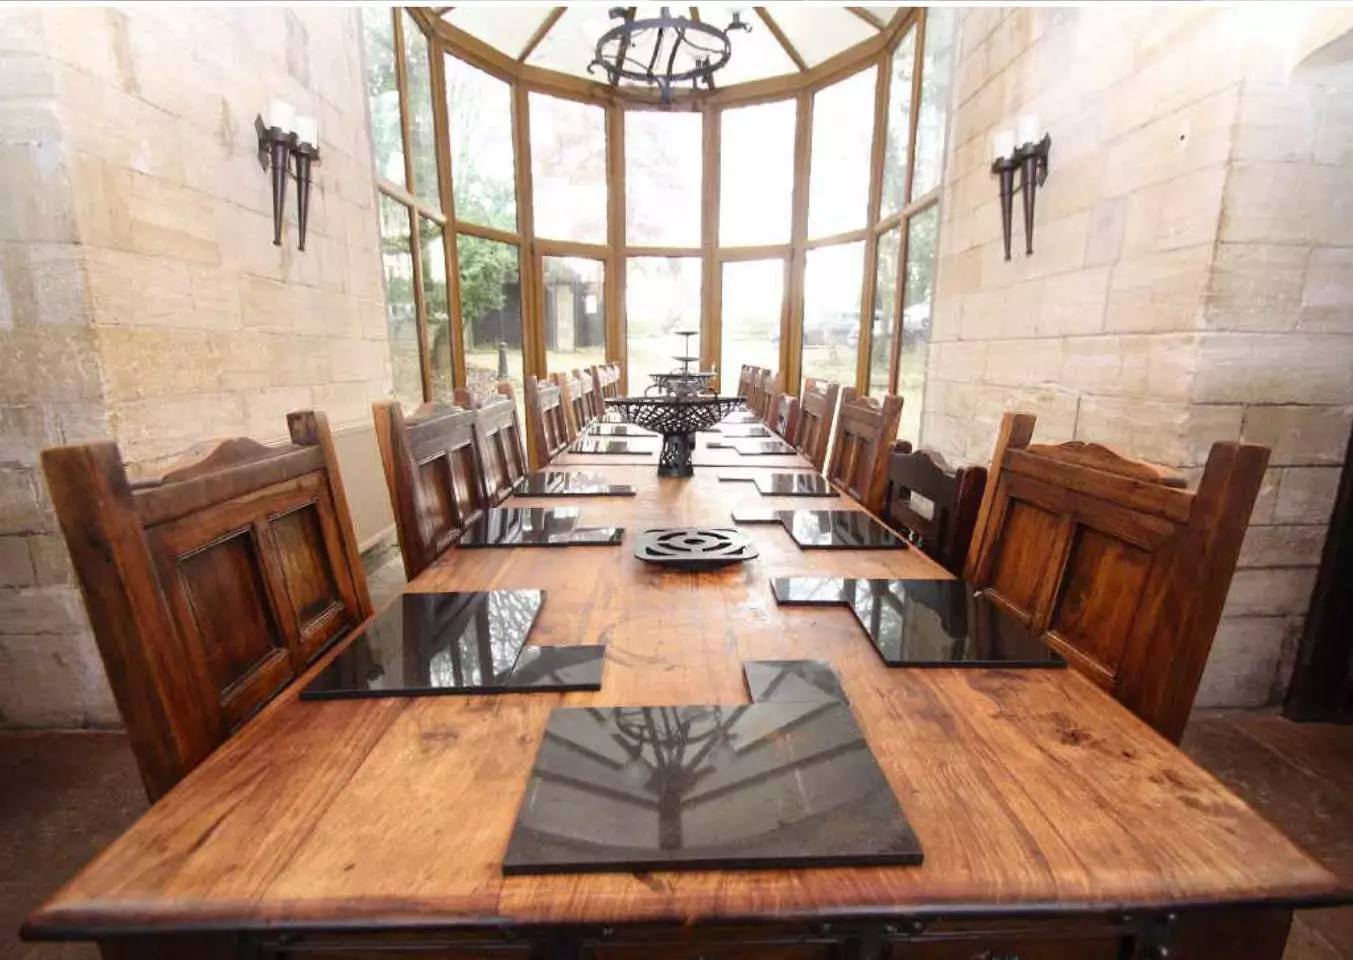 The impressive dining table.